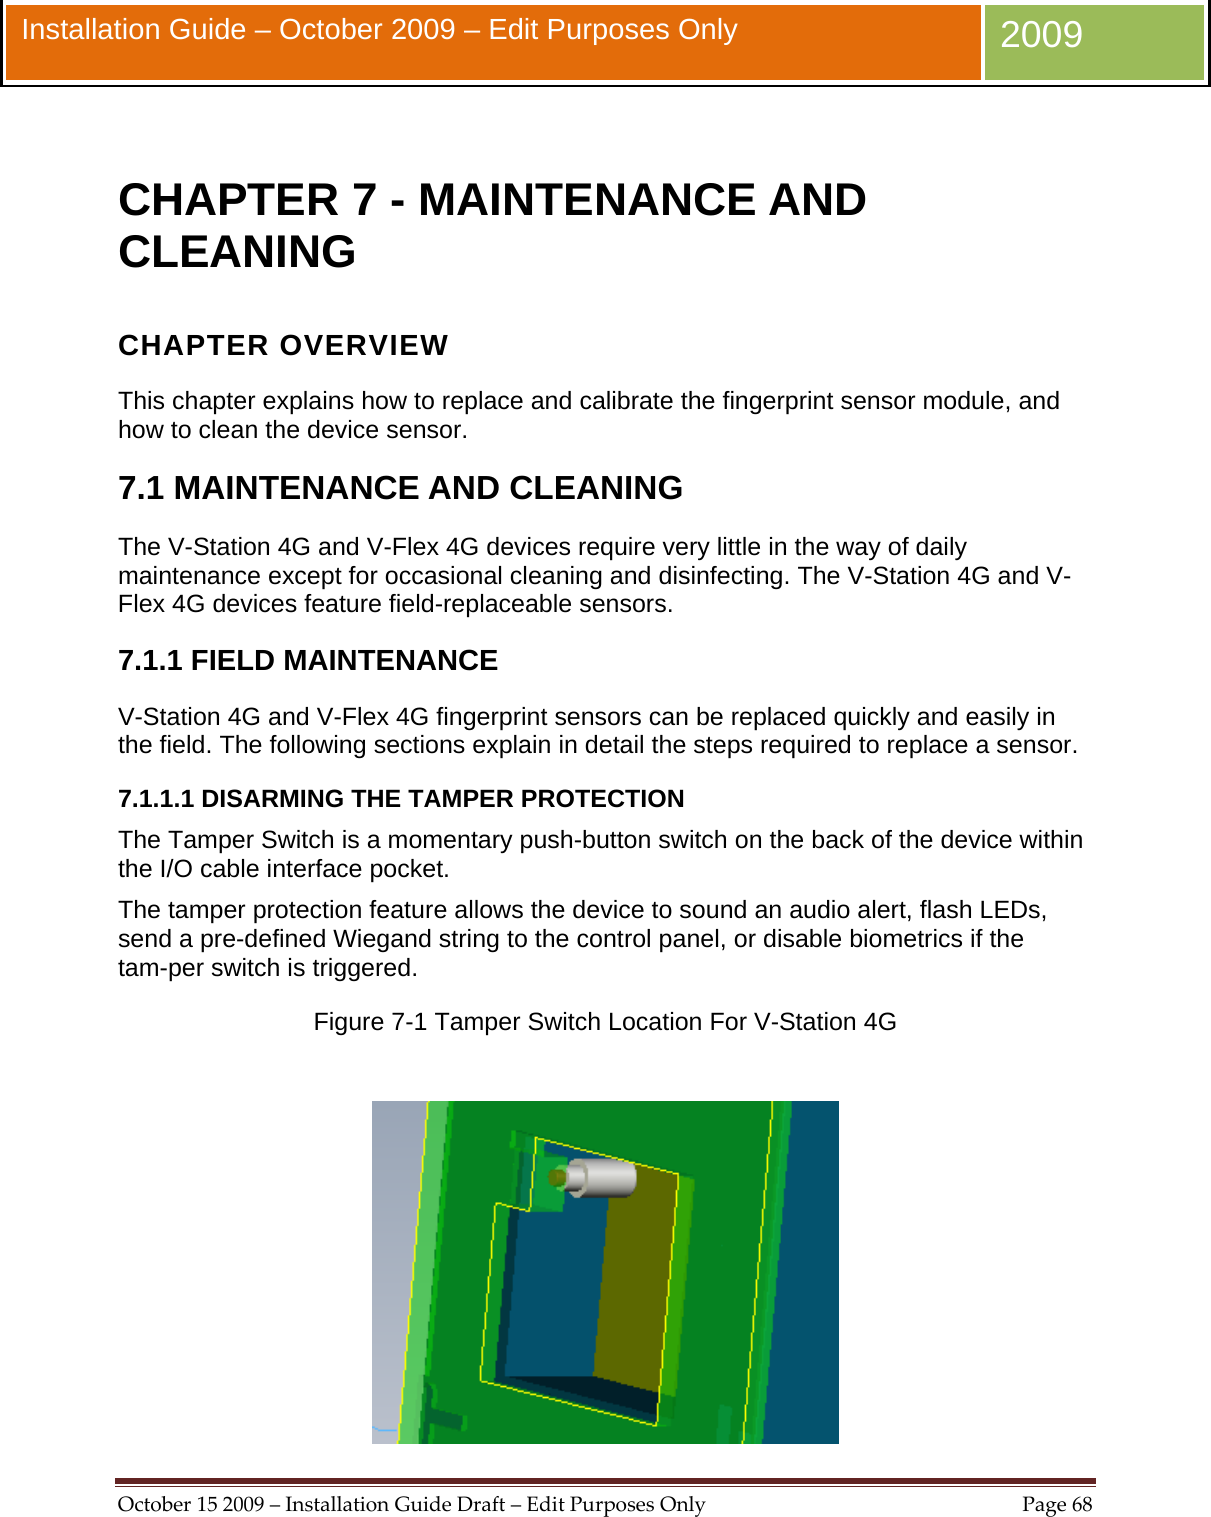  October152009–InstallationGuideDraft–EditPurposesOnlyPage68 Installation Guide – October 2009 – Edit Purposes Only  2009  CHAPTER 7 - MAINTENANCE AND CLEANING CHAPTER OVERVIEW This chapter explains how to replace and calibrate the fingerprint sensor module, and how to clean the device sensor. 7.1 MAINTENANCE AND CLEANING The V-Station 4G and V-Flex 4G devices require very little in the way of daily maintenance except for occasional cleaning and disinfecting. The V-Station 4G and V-Flex 4G devices feature field-replaceable sensors. 7.1.1 FIELD MAINTENANCE V-Station 4G and V-Flex 4G fingerprint sensors can be replaced quickly and easily in the field. The following sections explain in detail the steps required to replace a sensor. 7.1.1.1 DISARMING THE TAMPER PROTECTION The Tamper Switch is a momentary push-button switch on the back of the device within the I/O cable interface pocket. The tamper protection feature allows the device to sound an audio alert, flash LEDs, send a pre-defined Wiegand string to the control panel, or disable biometrics if the tam-per switch is triggered. Figure 7-1 Tamper Switch Location For V-Station 4G   